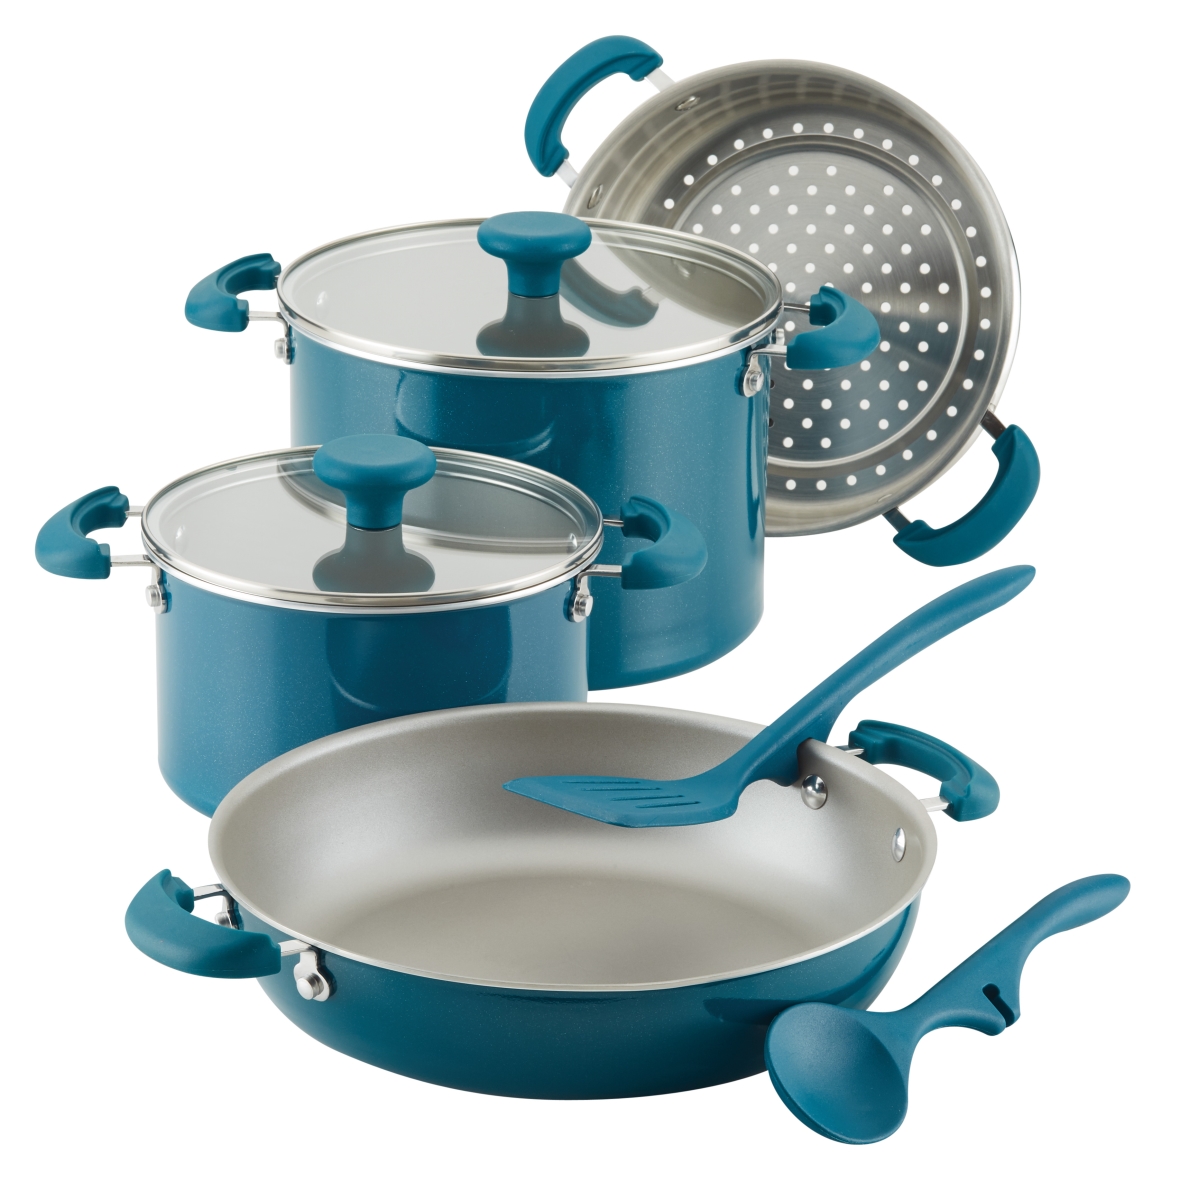 Rachael Ray 12167 Create Delicious Stackable Nonstick Cookware Set - Teal Shimmer, 8 Piece